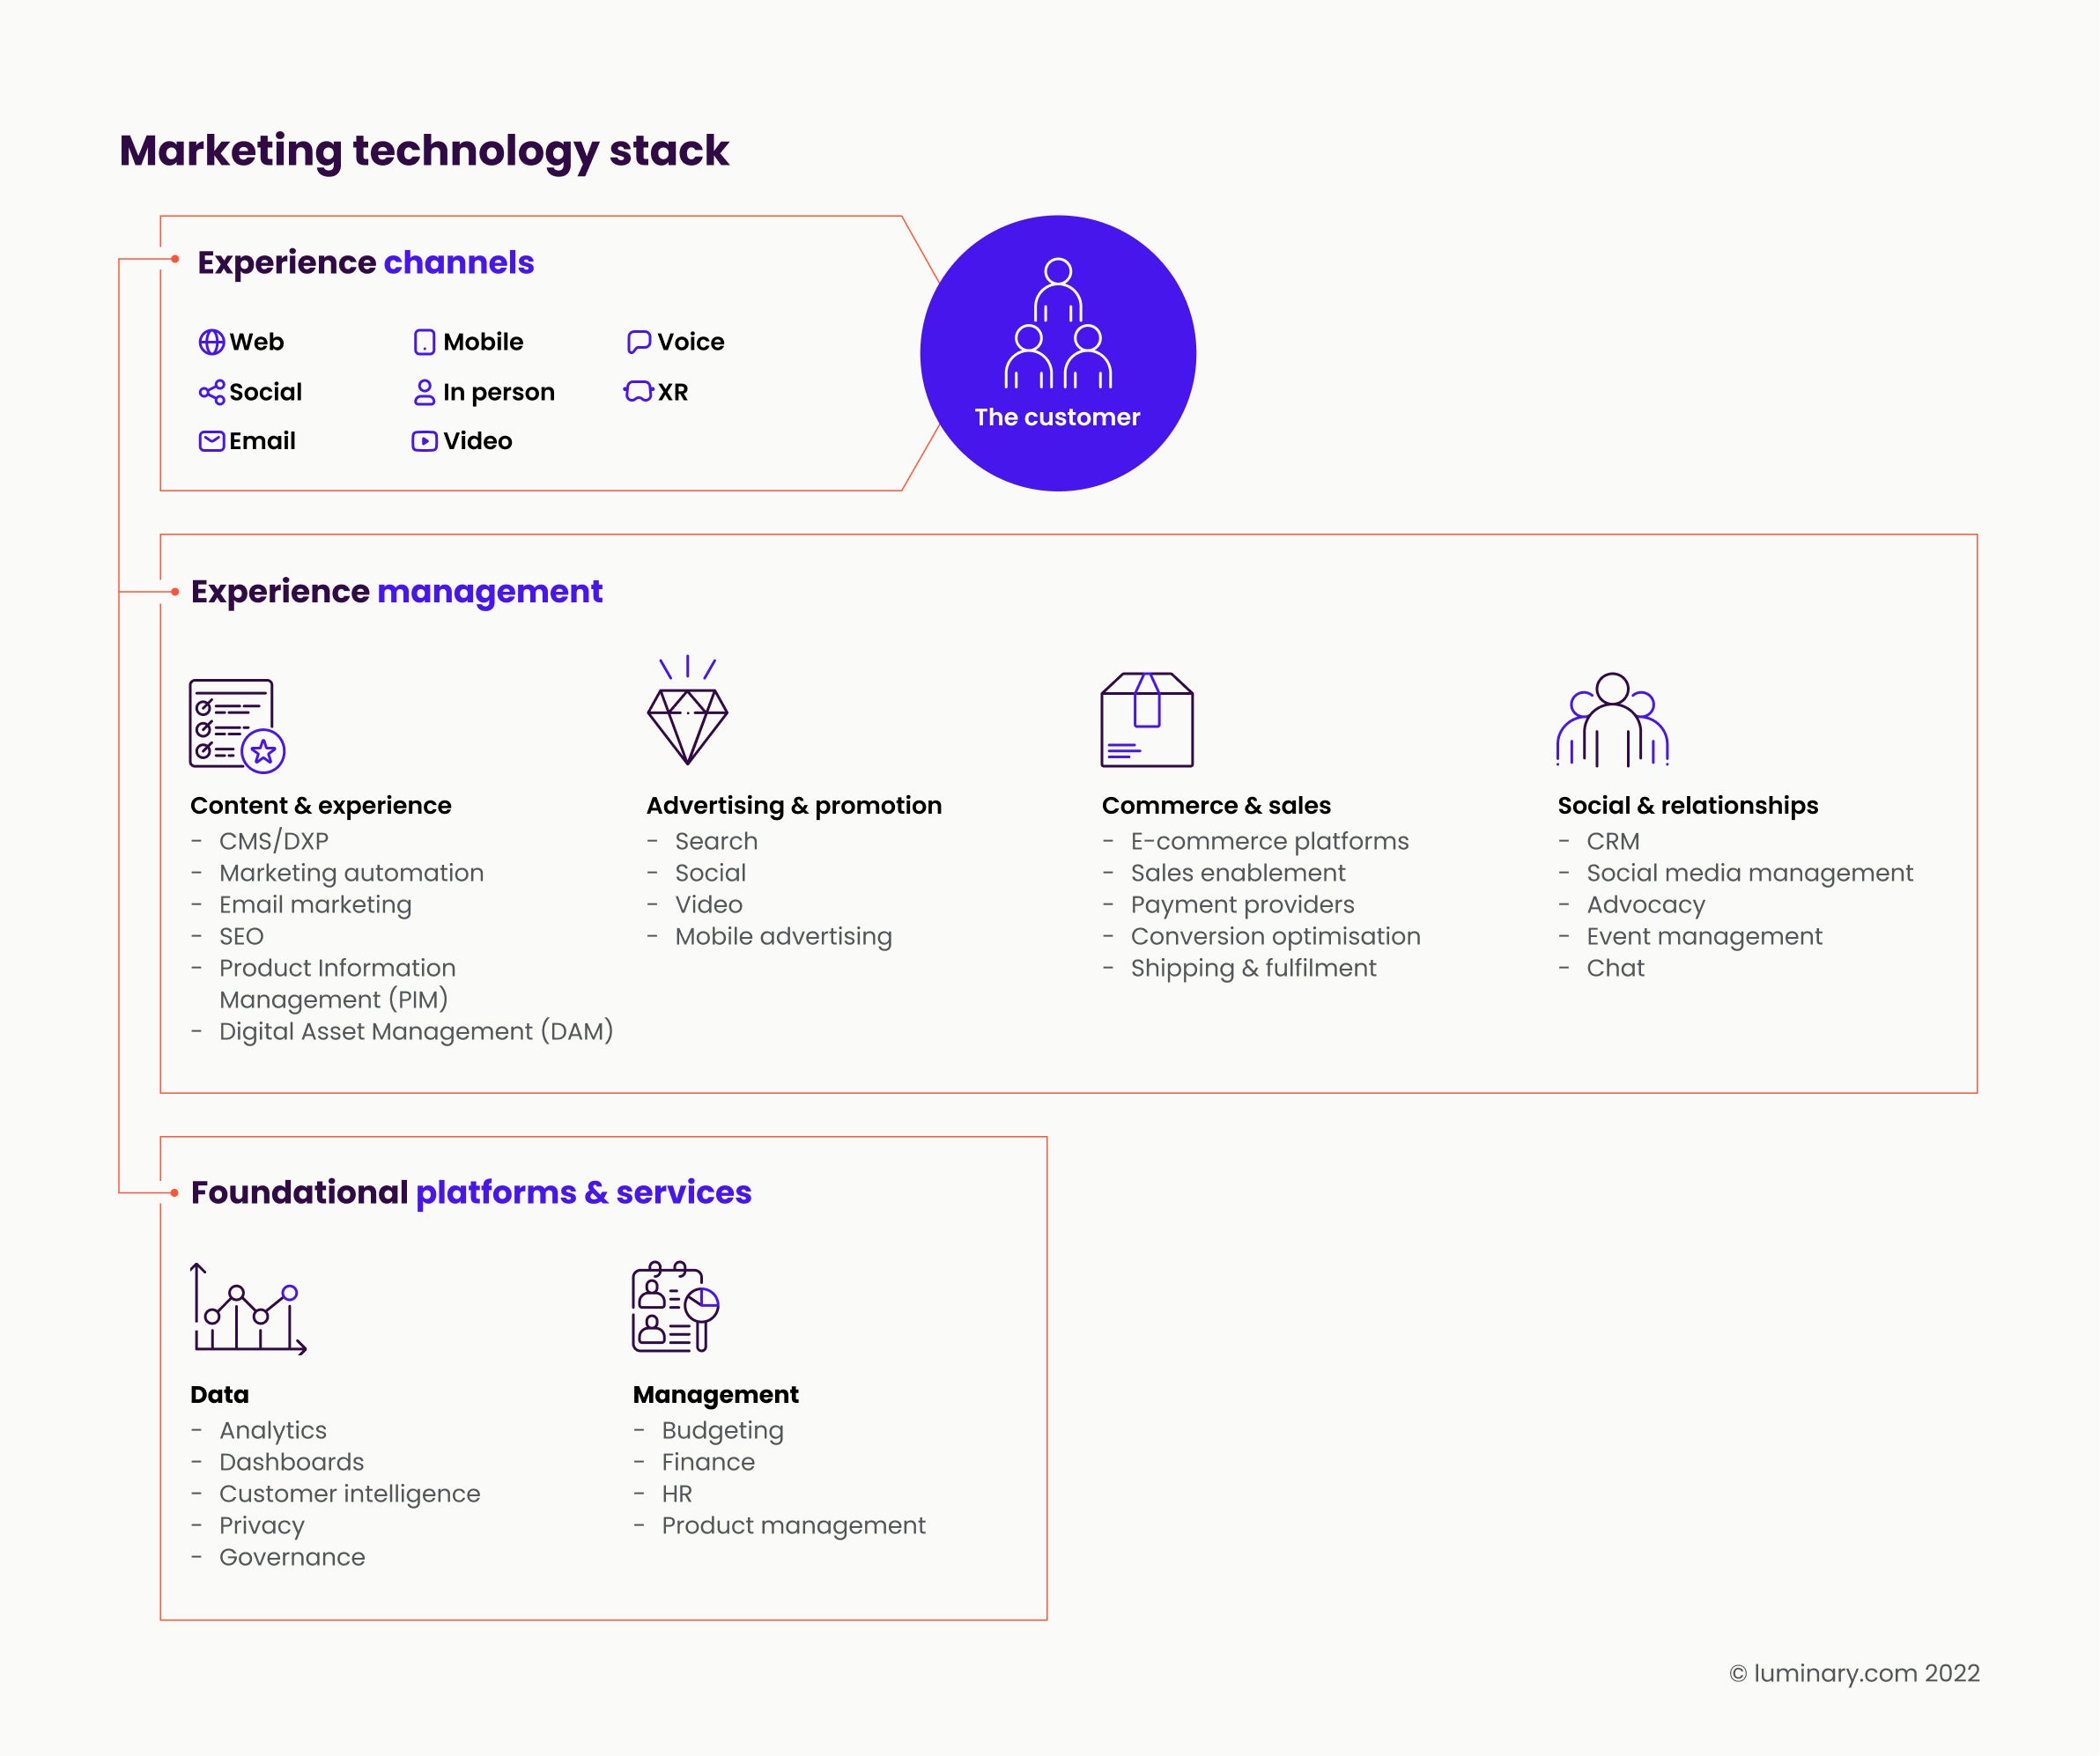 3-level martech stack diagram consisting of Experience channels, Experience management tools and Foundational platforms and services.